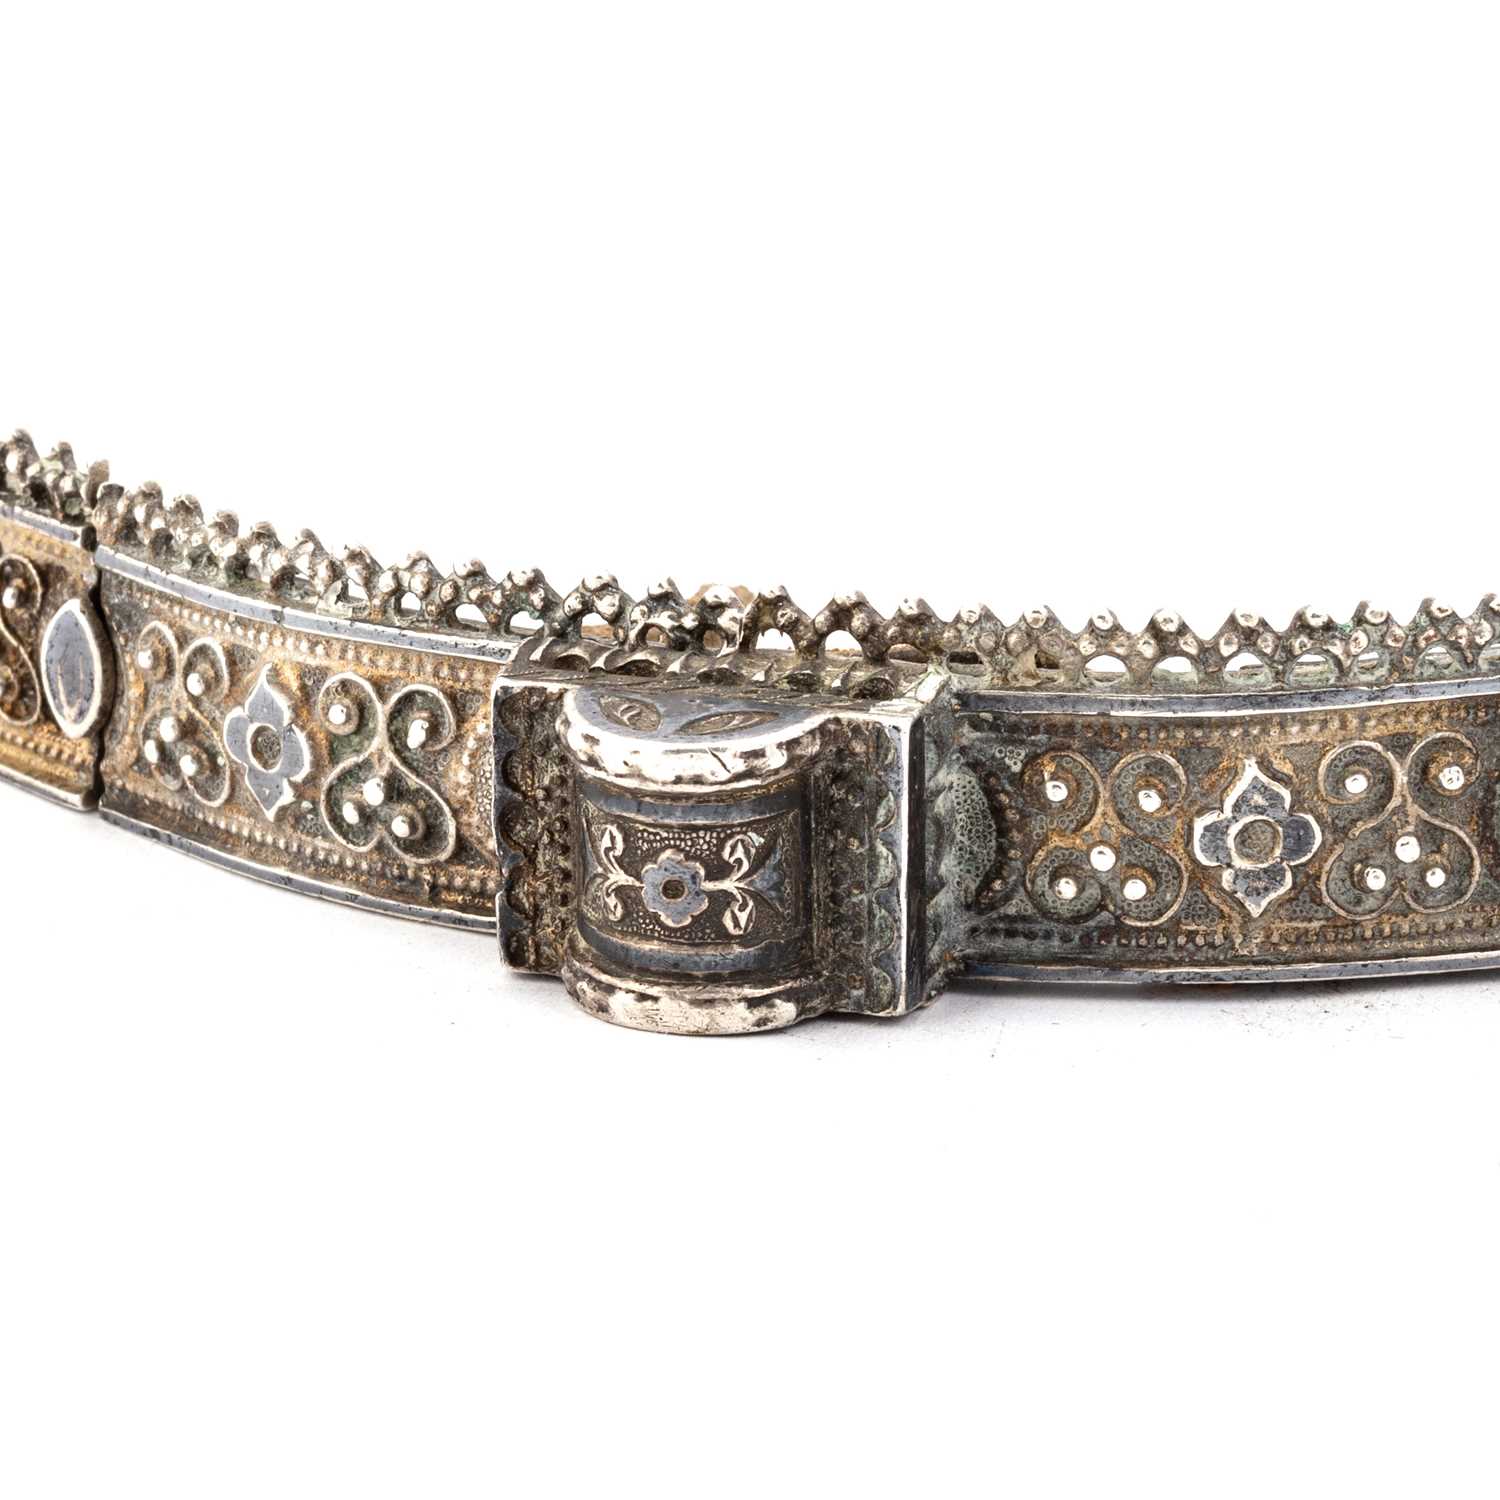 AN EARLY 20TH CENTURY RUSSIAN SILVER AND NIELLO BELT - Image 2 of 5